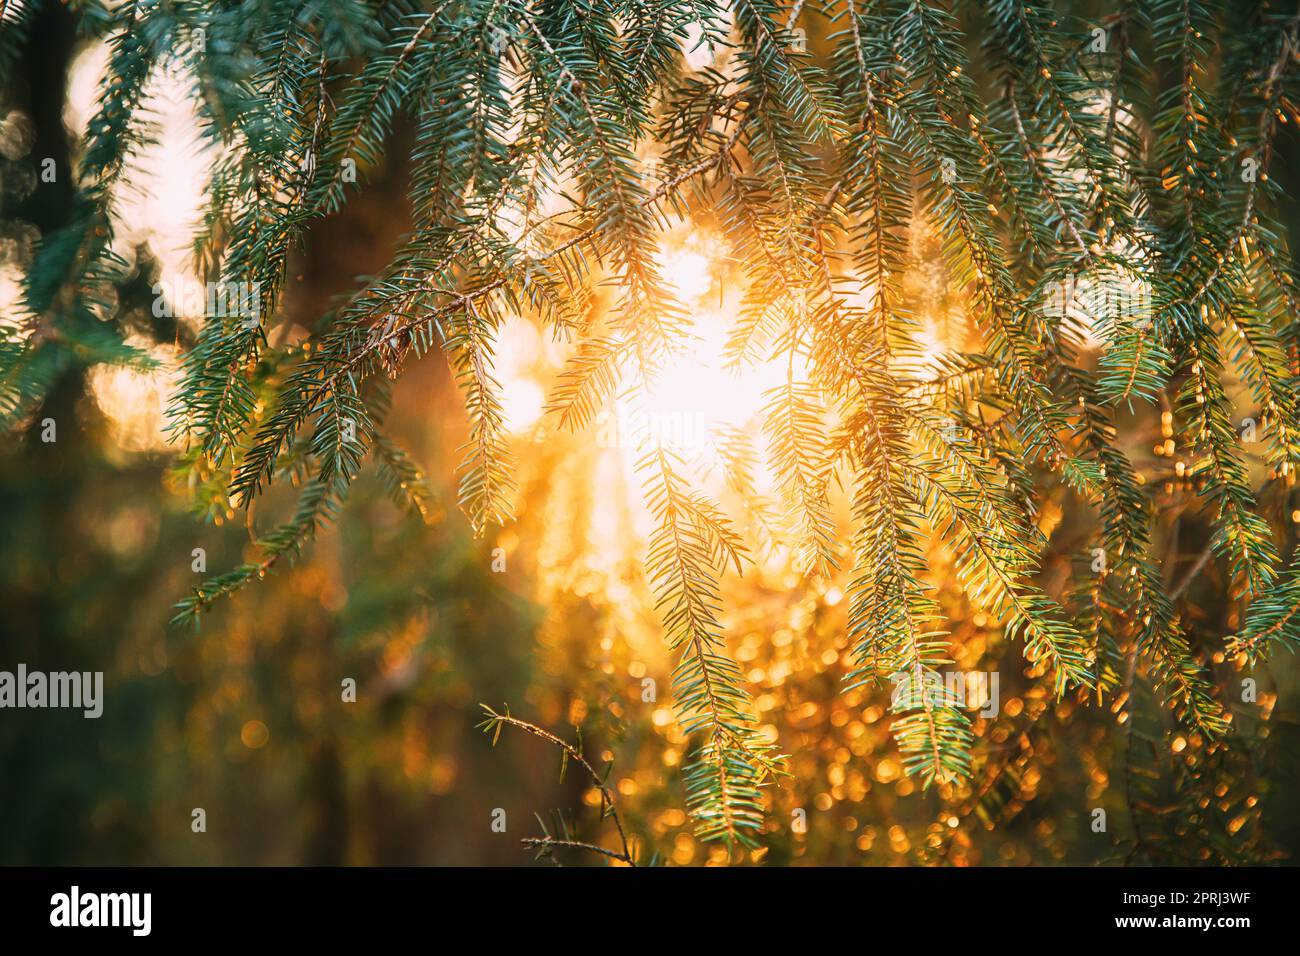 Beautiful Sunset Sunrise In Sunny Autumn Summer Pine Forest. Sunshine Through Woods. Close Up Of Pine Branches With Needles Stock Photo